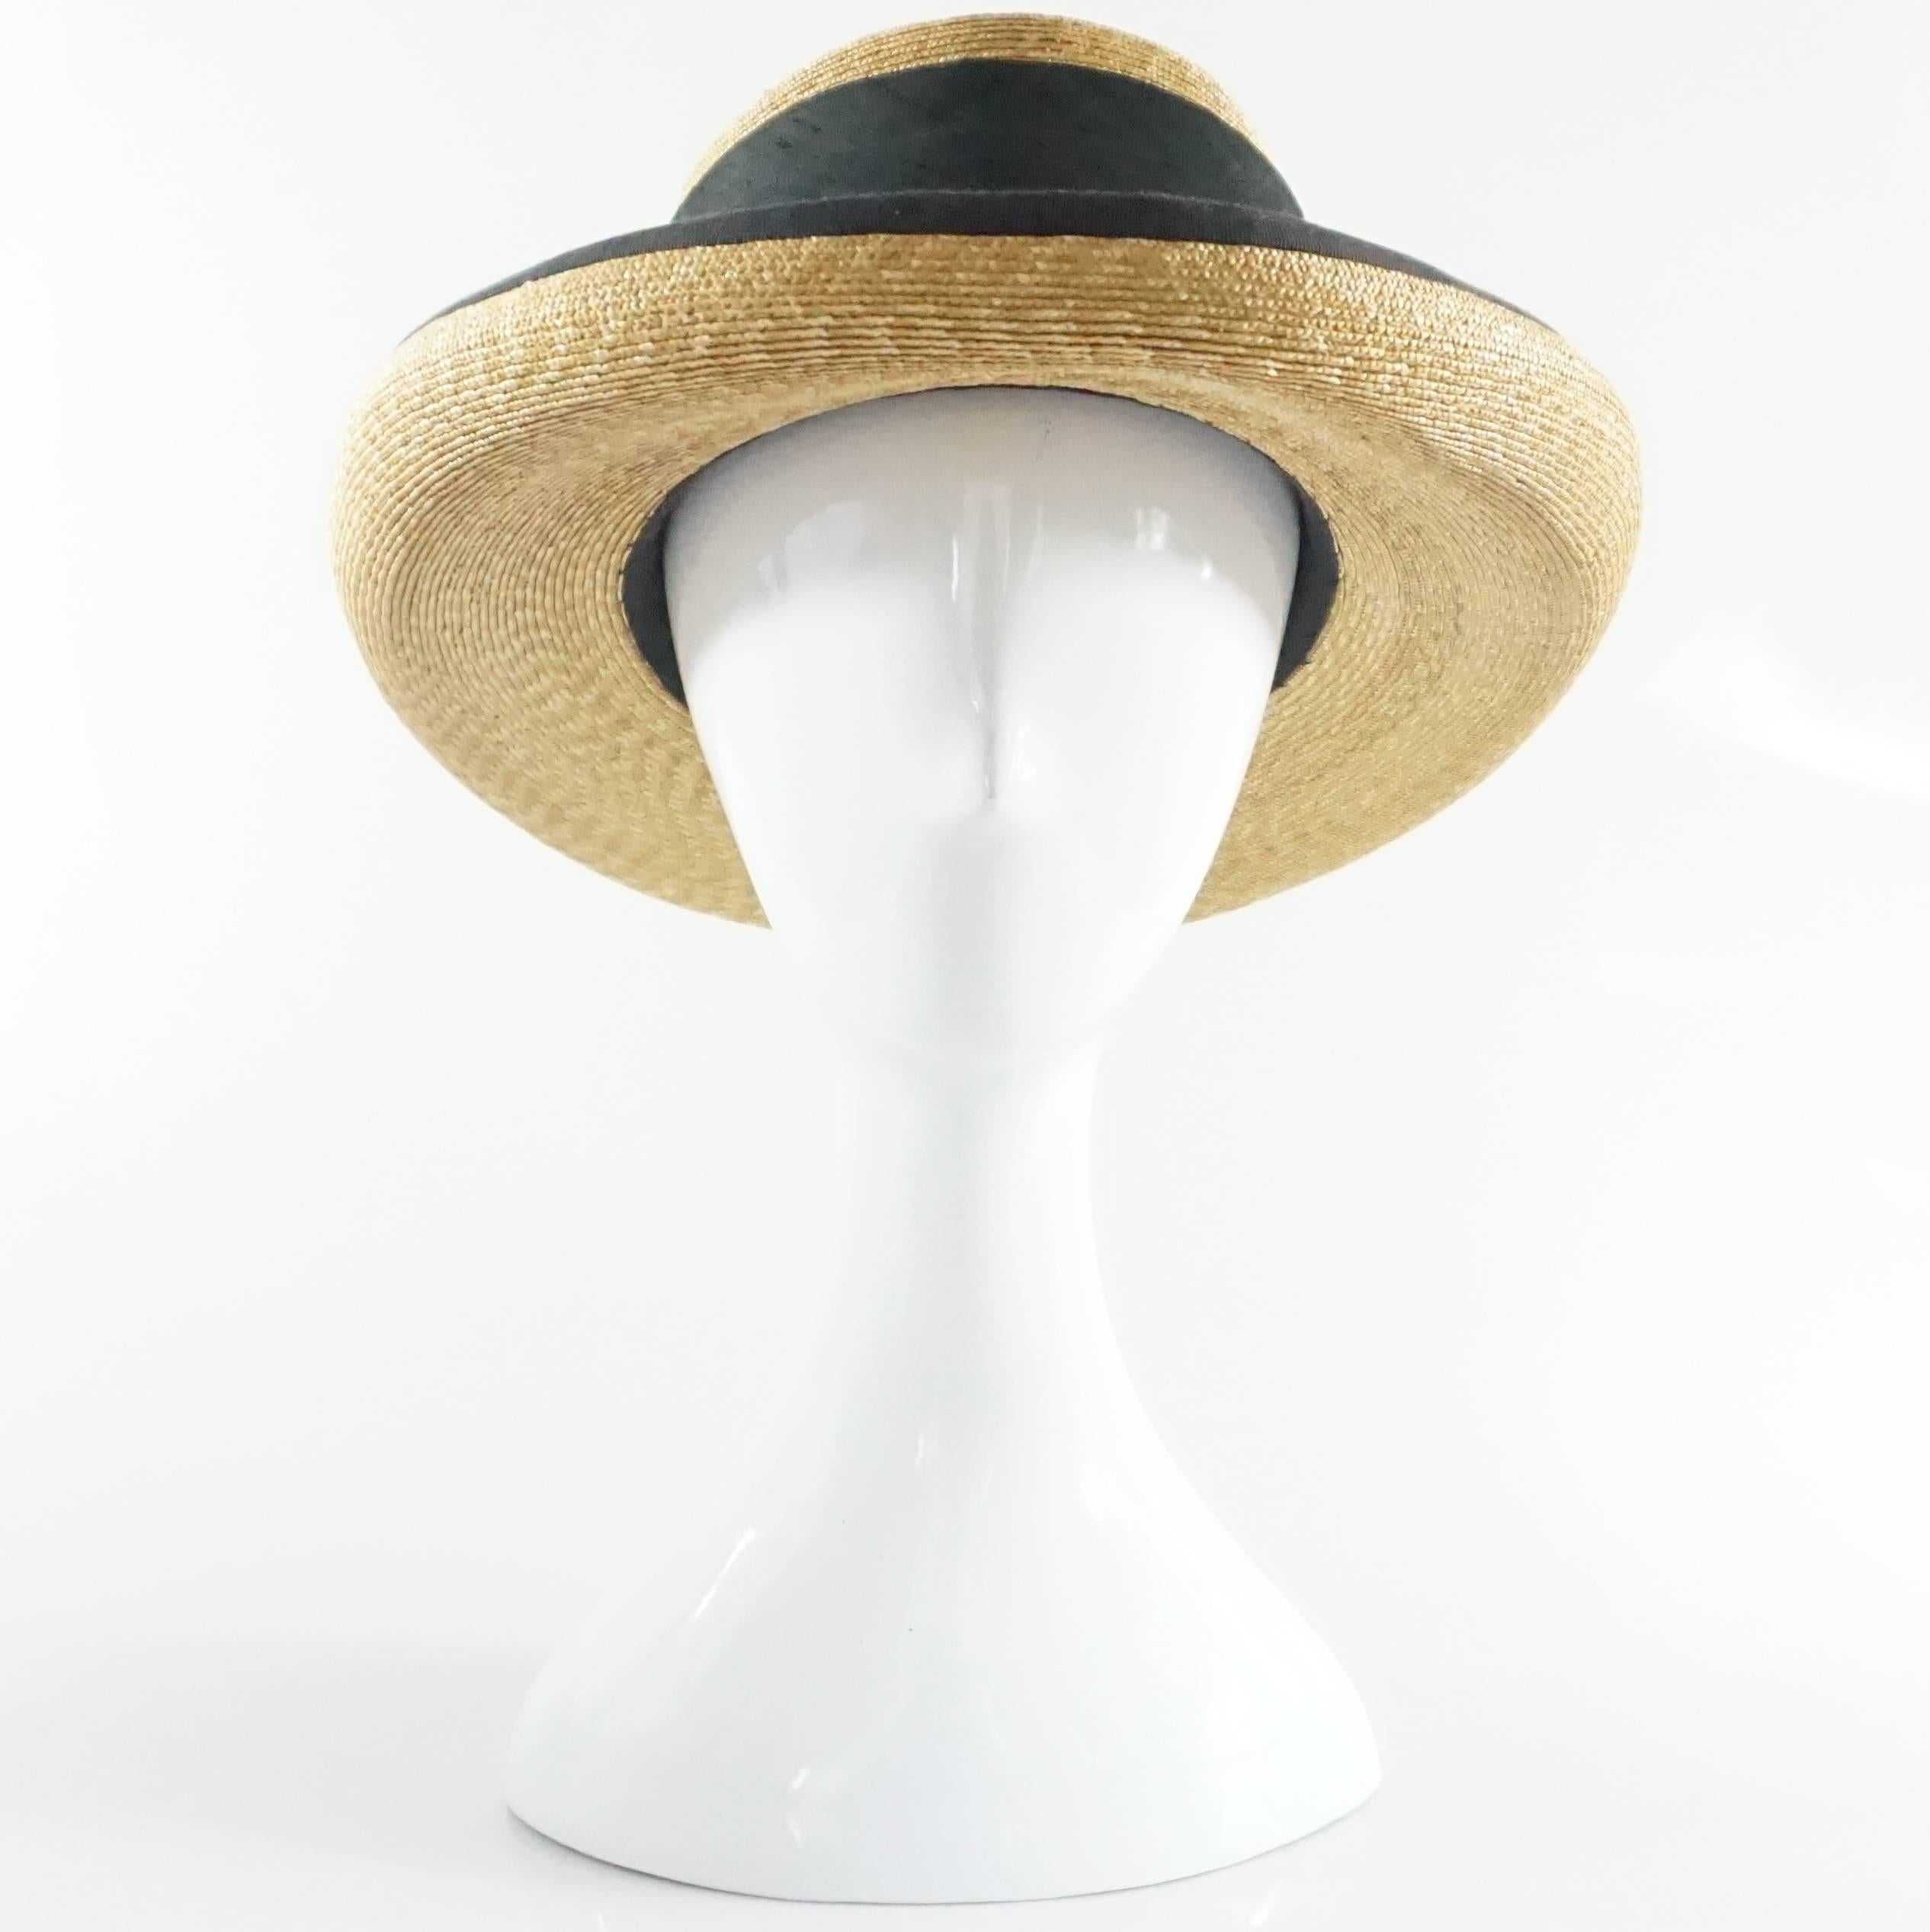 Suzanne Couture Millinery Beige with Black Straw Hat 2